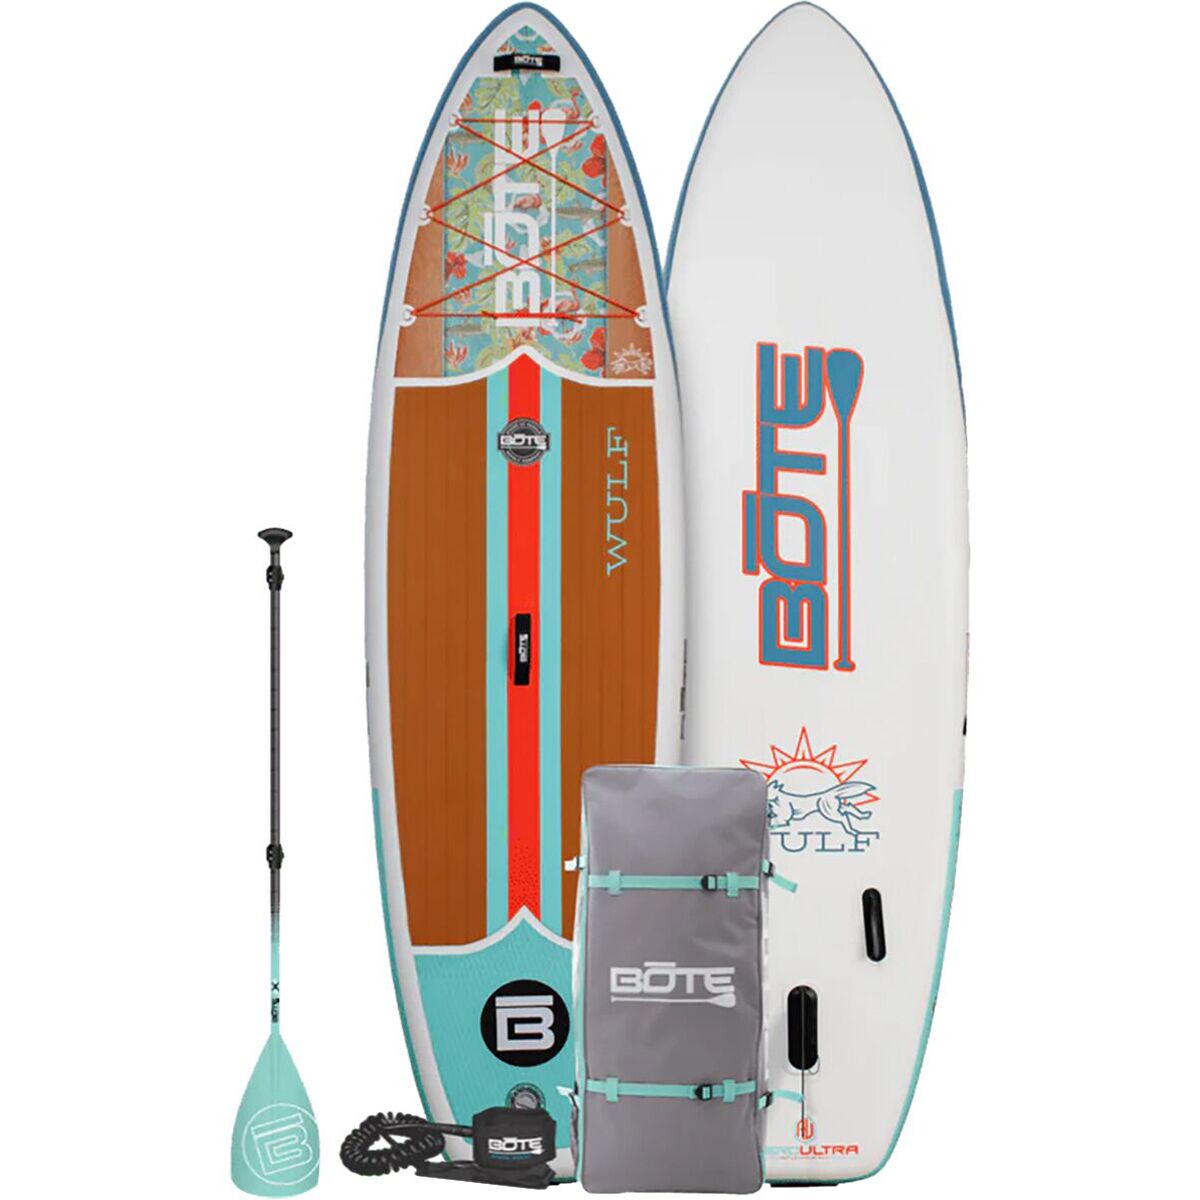 BOTE Wulf Aero 10ft 4in Inflatable Stand-Up Paddleboard